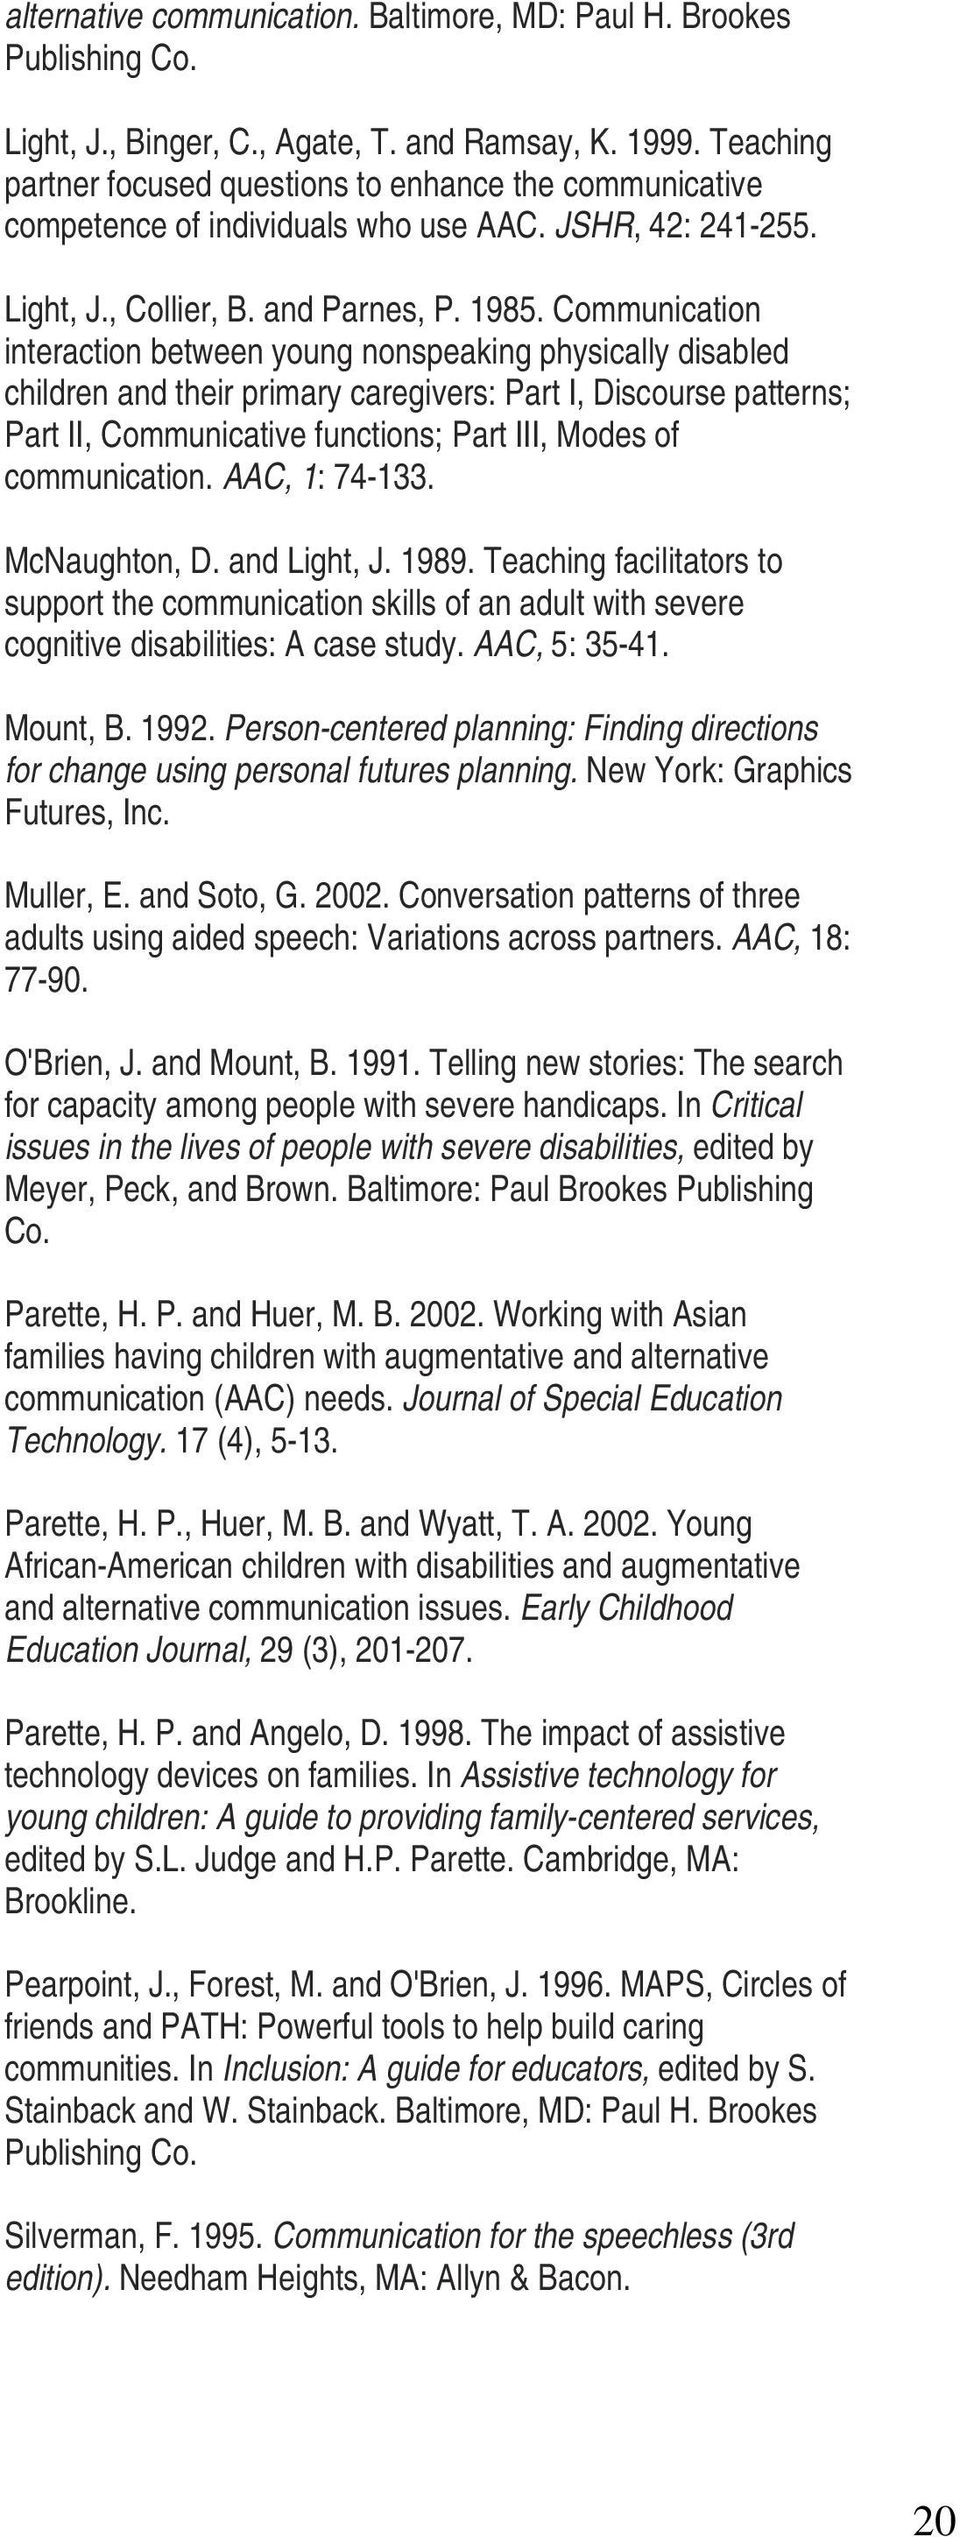 Communication interaction between young nonspeaking physically disabled children and their primary caregivers: Part I, Discourse patterns; Part II, Communicative functions; Part III, Modes of